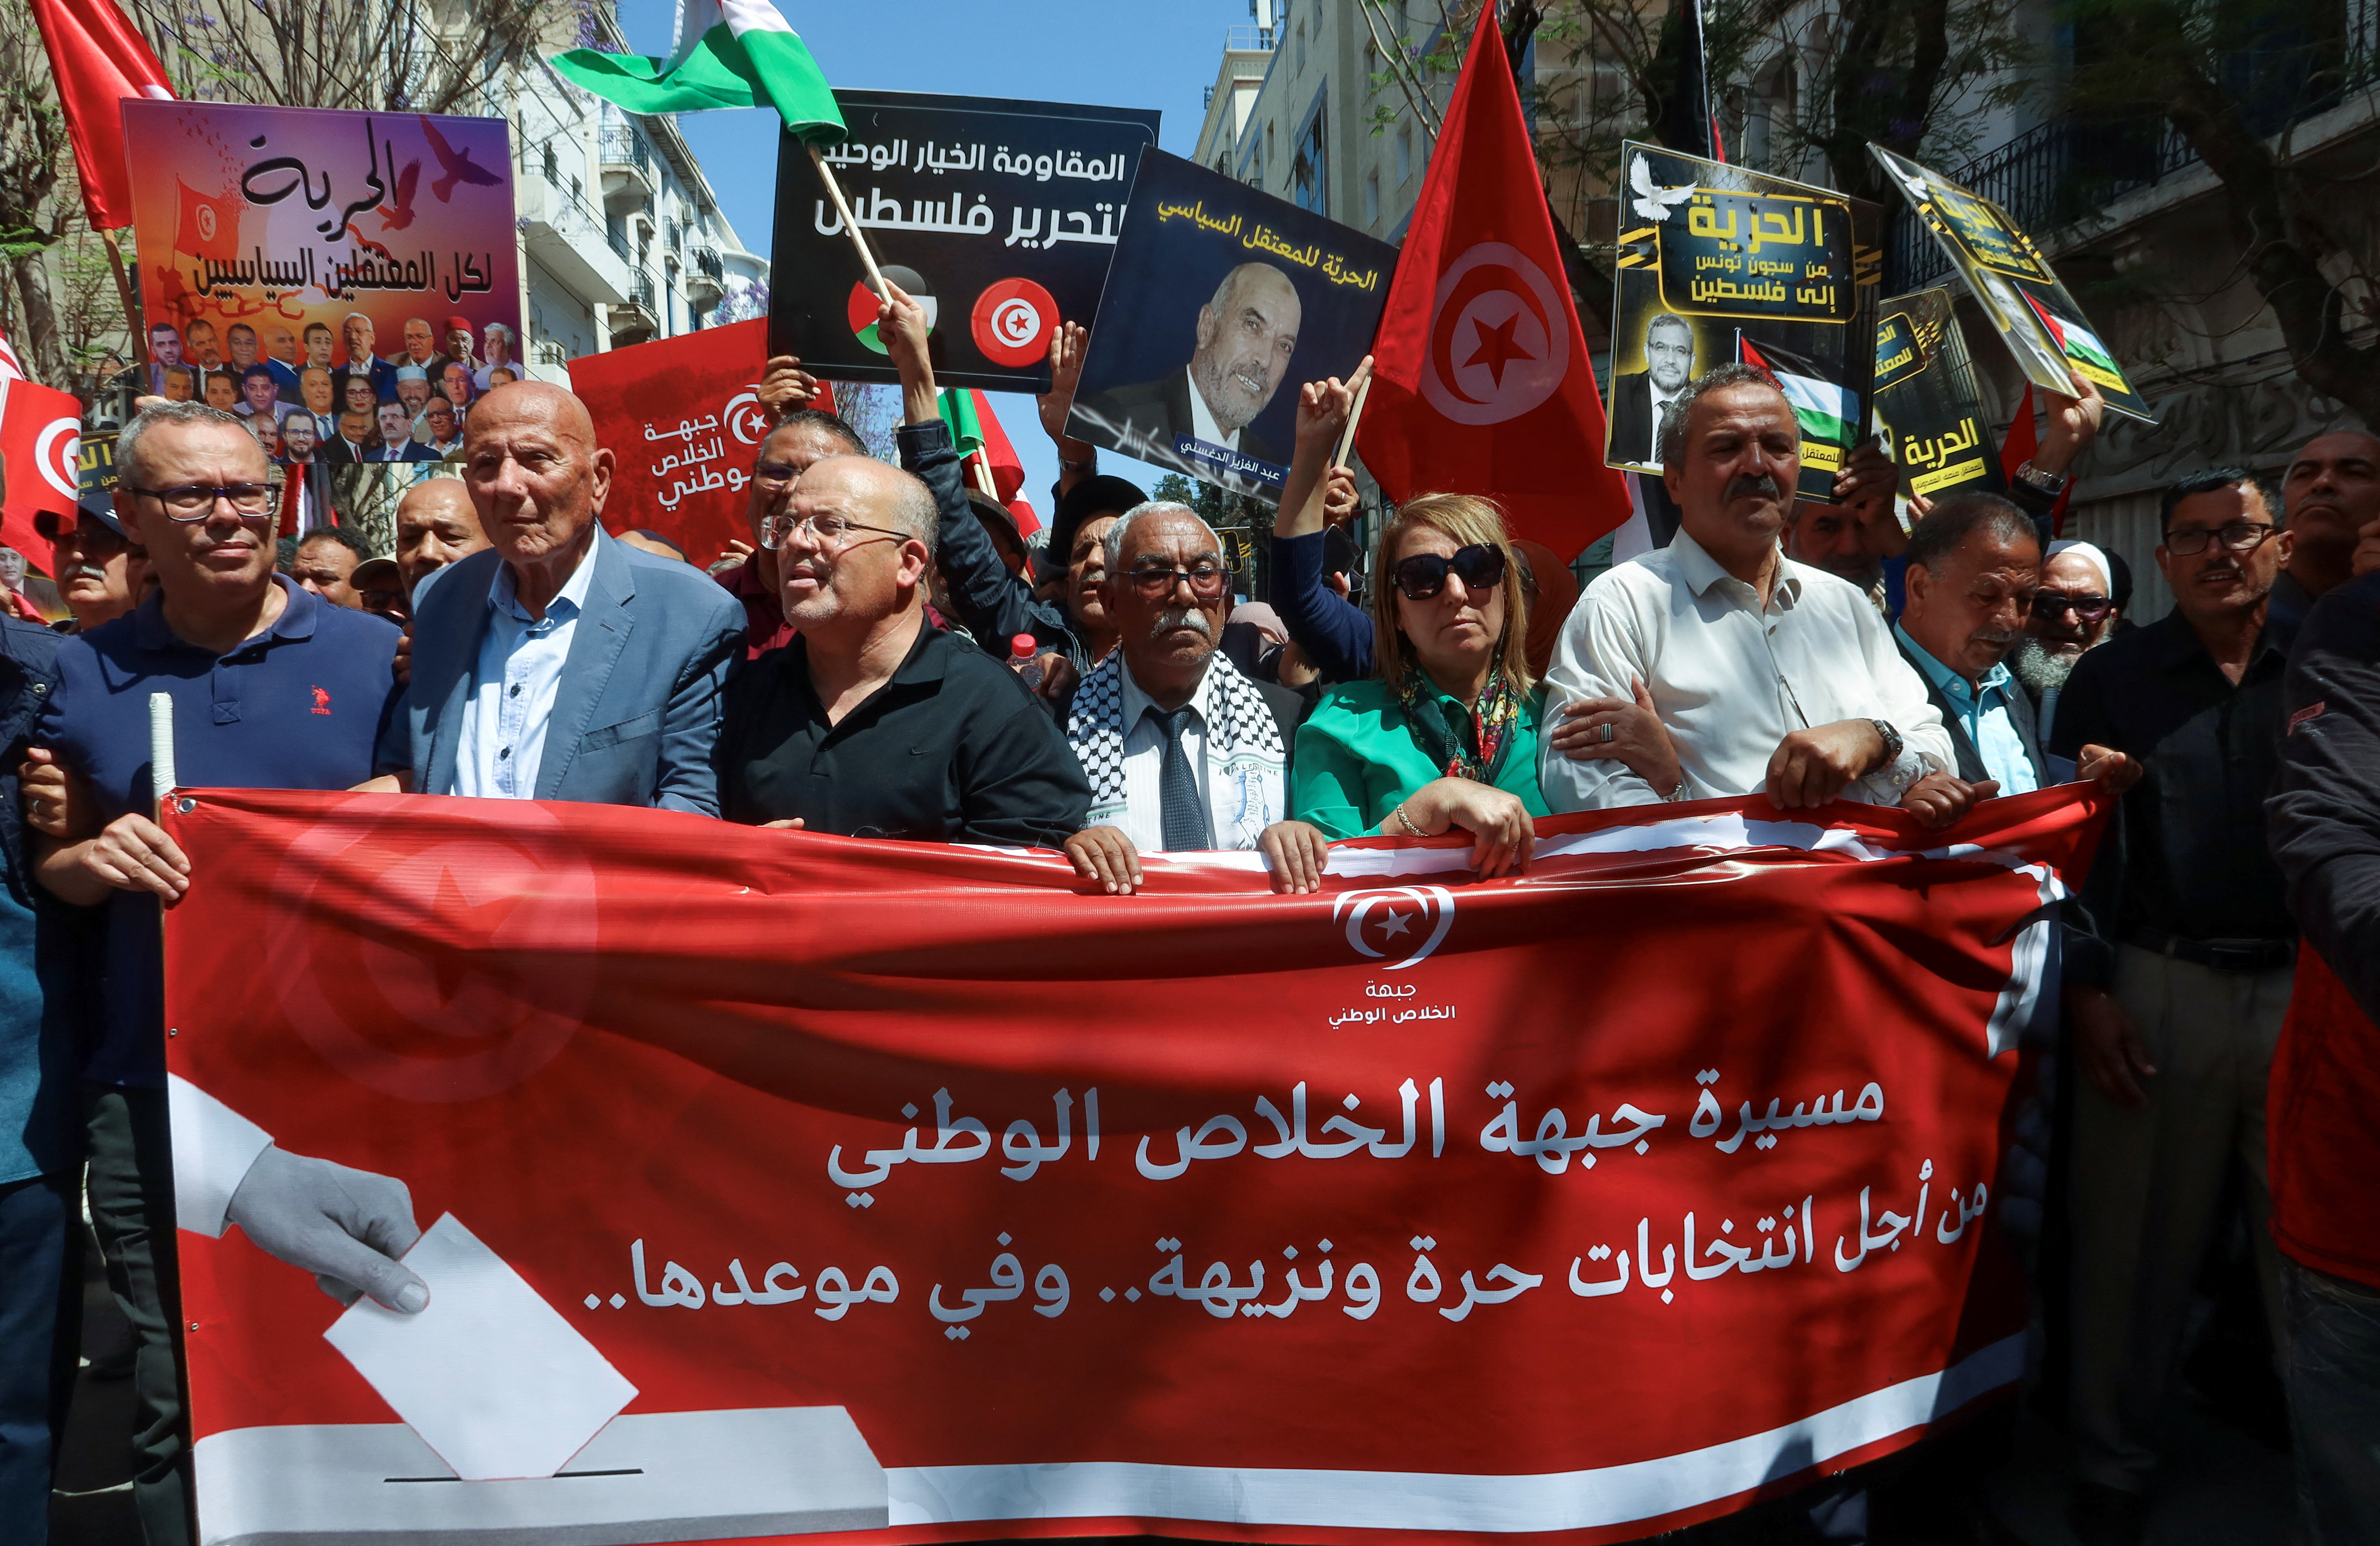 Protest demanding the release of imprisoned journalists, activists, opposition figures and setting a date for fair presidential elections in Tunis